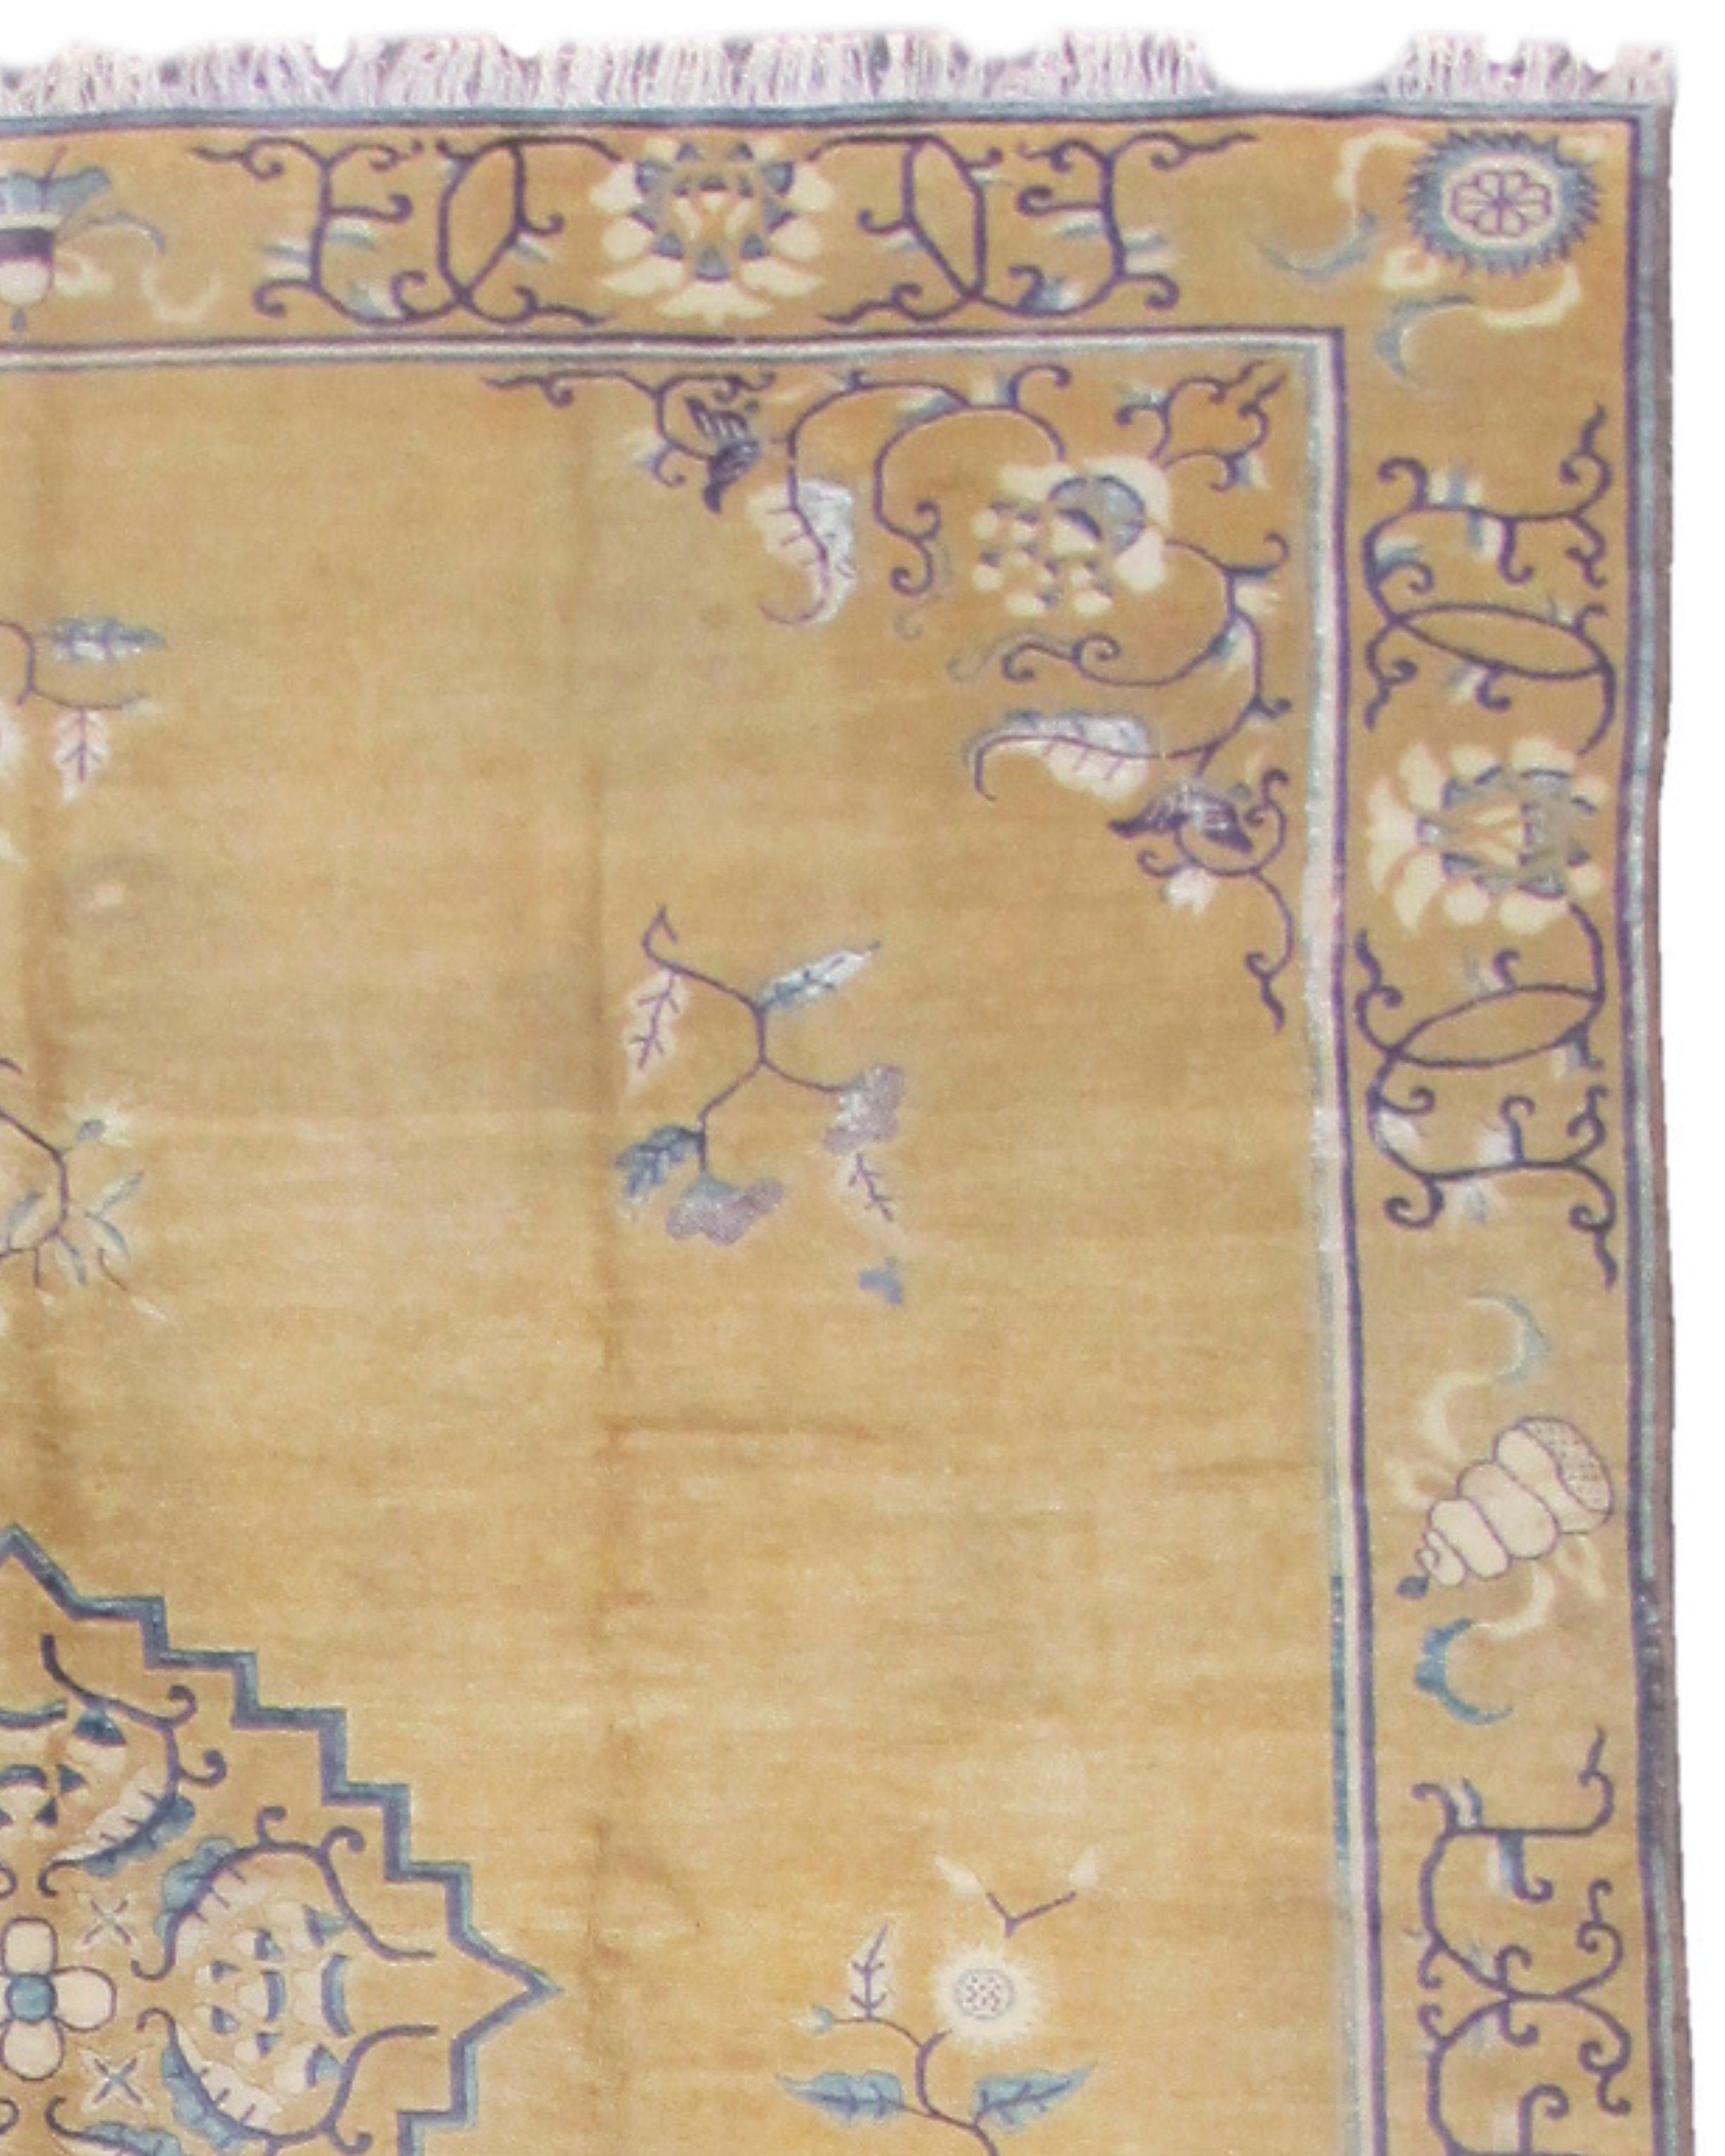 Peking Carpet, Late 19th Century

Additional Information:
Dimensions: 11'3